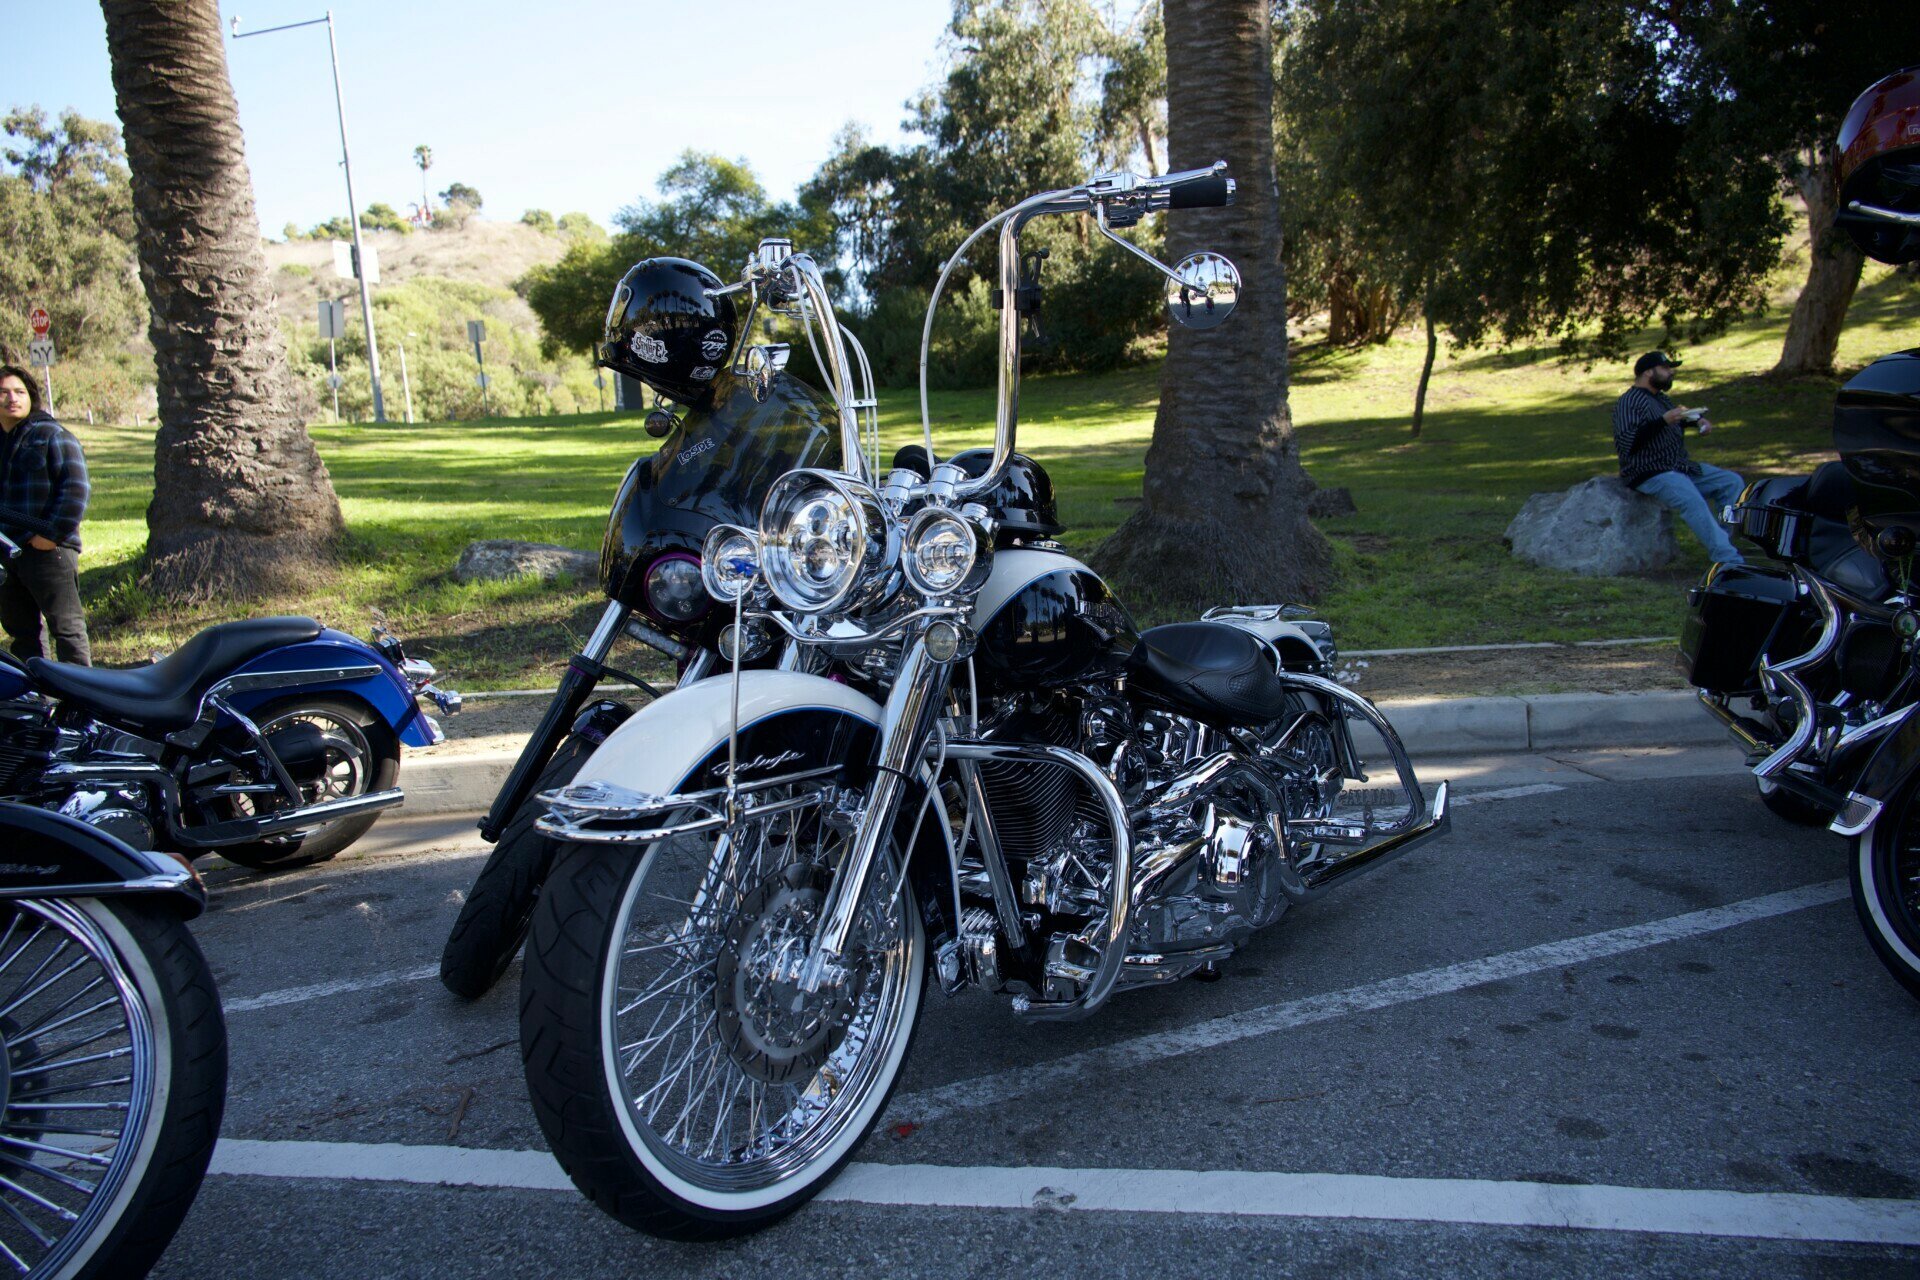 Classic black and white motorcycle with high handlebars at an outdoor event in Elysian Park, Los Angeles